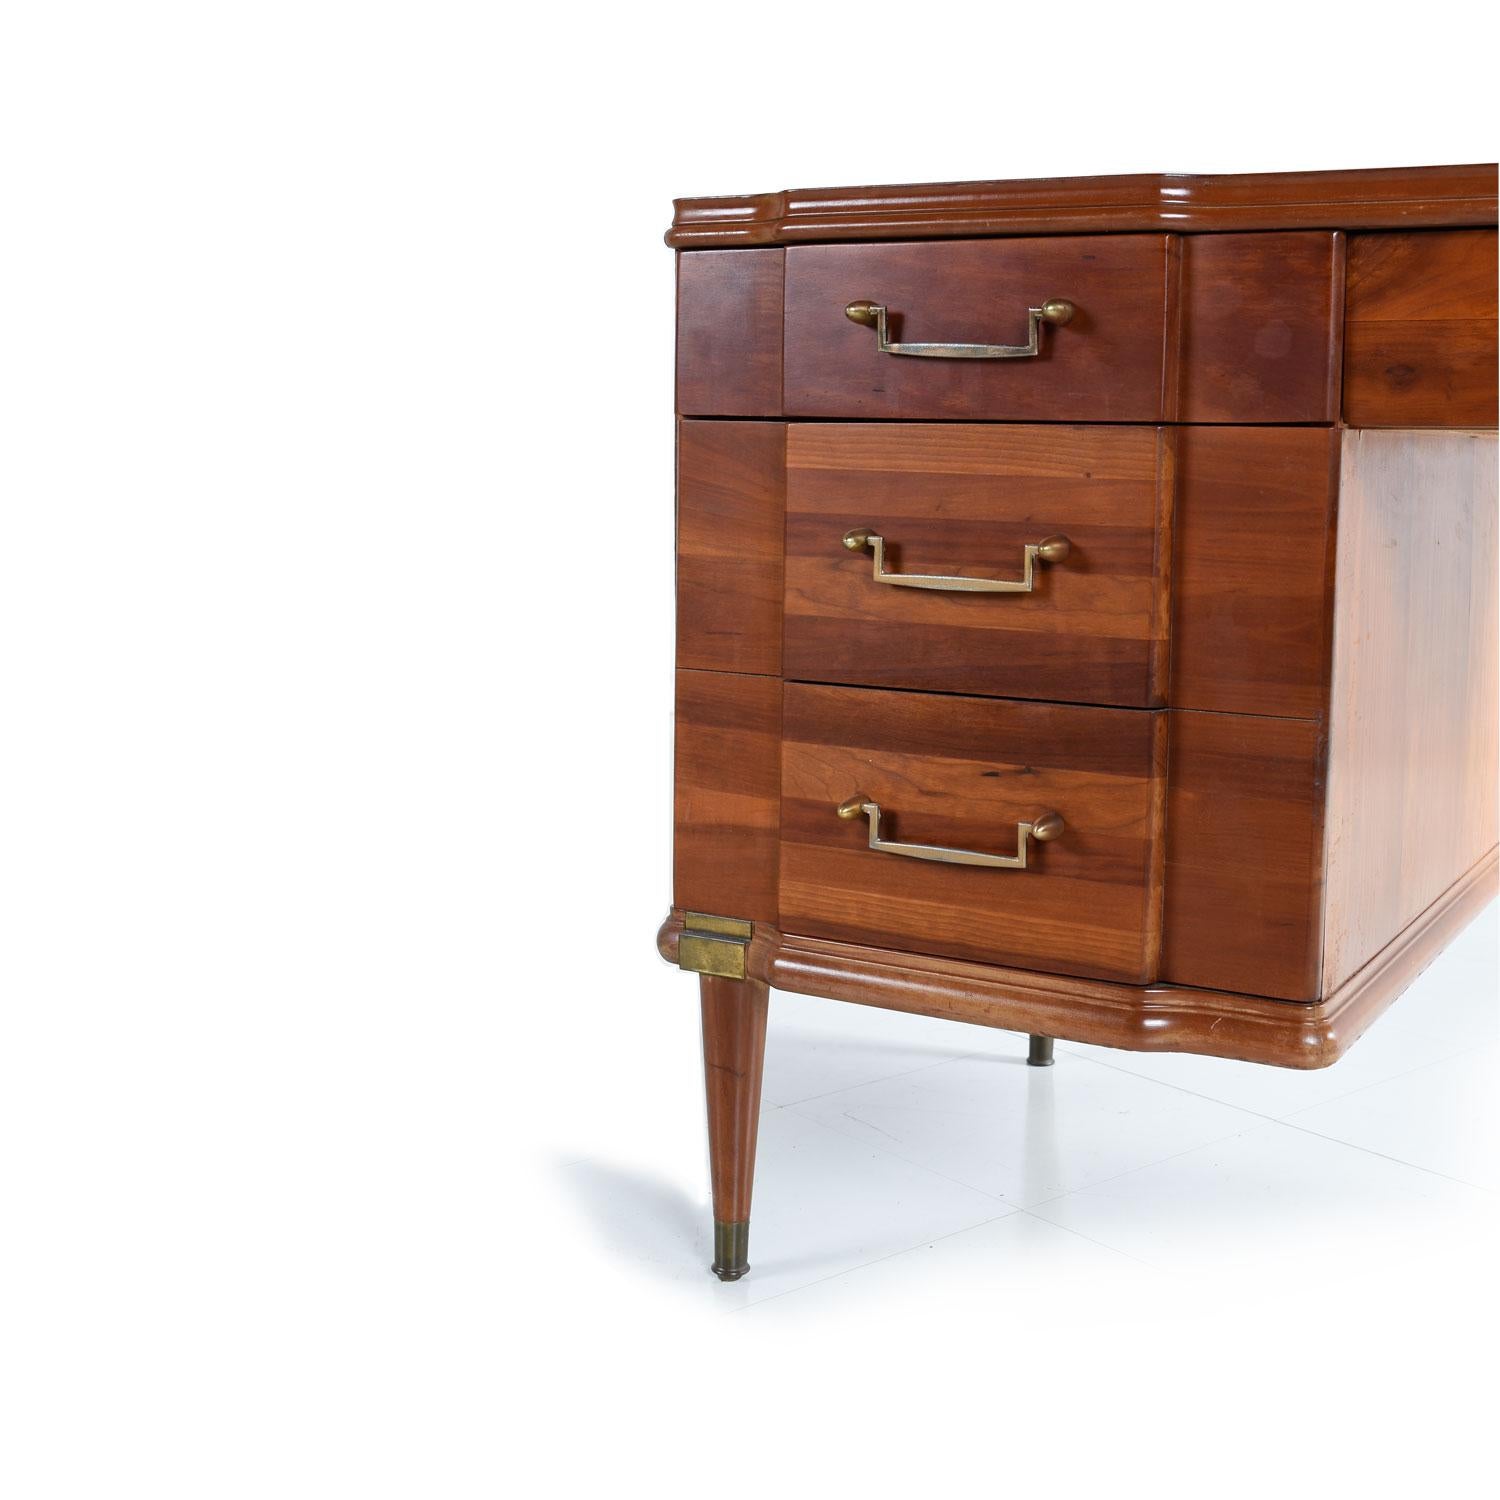 American Machine Age Cherry Desk with Brass Accents by Hickory MFG